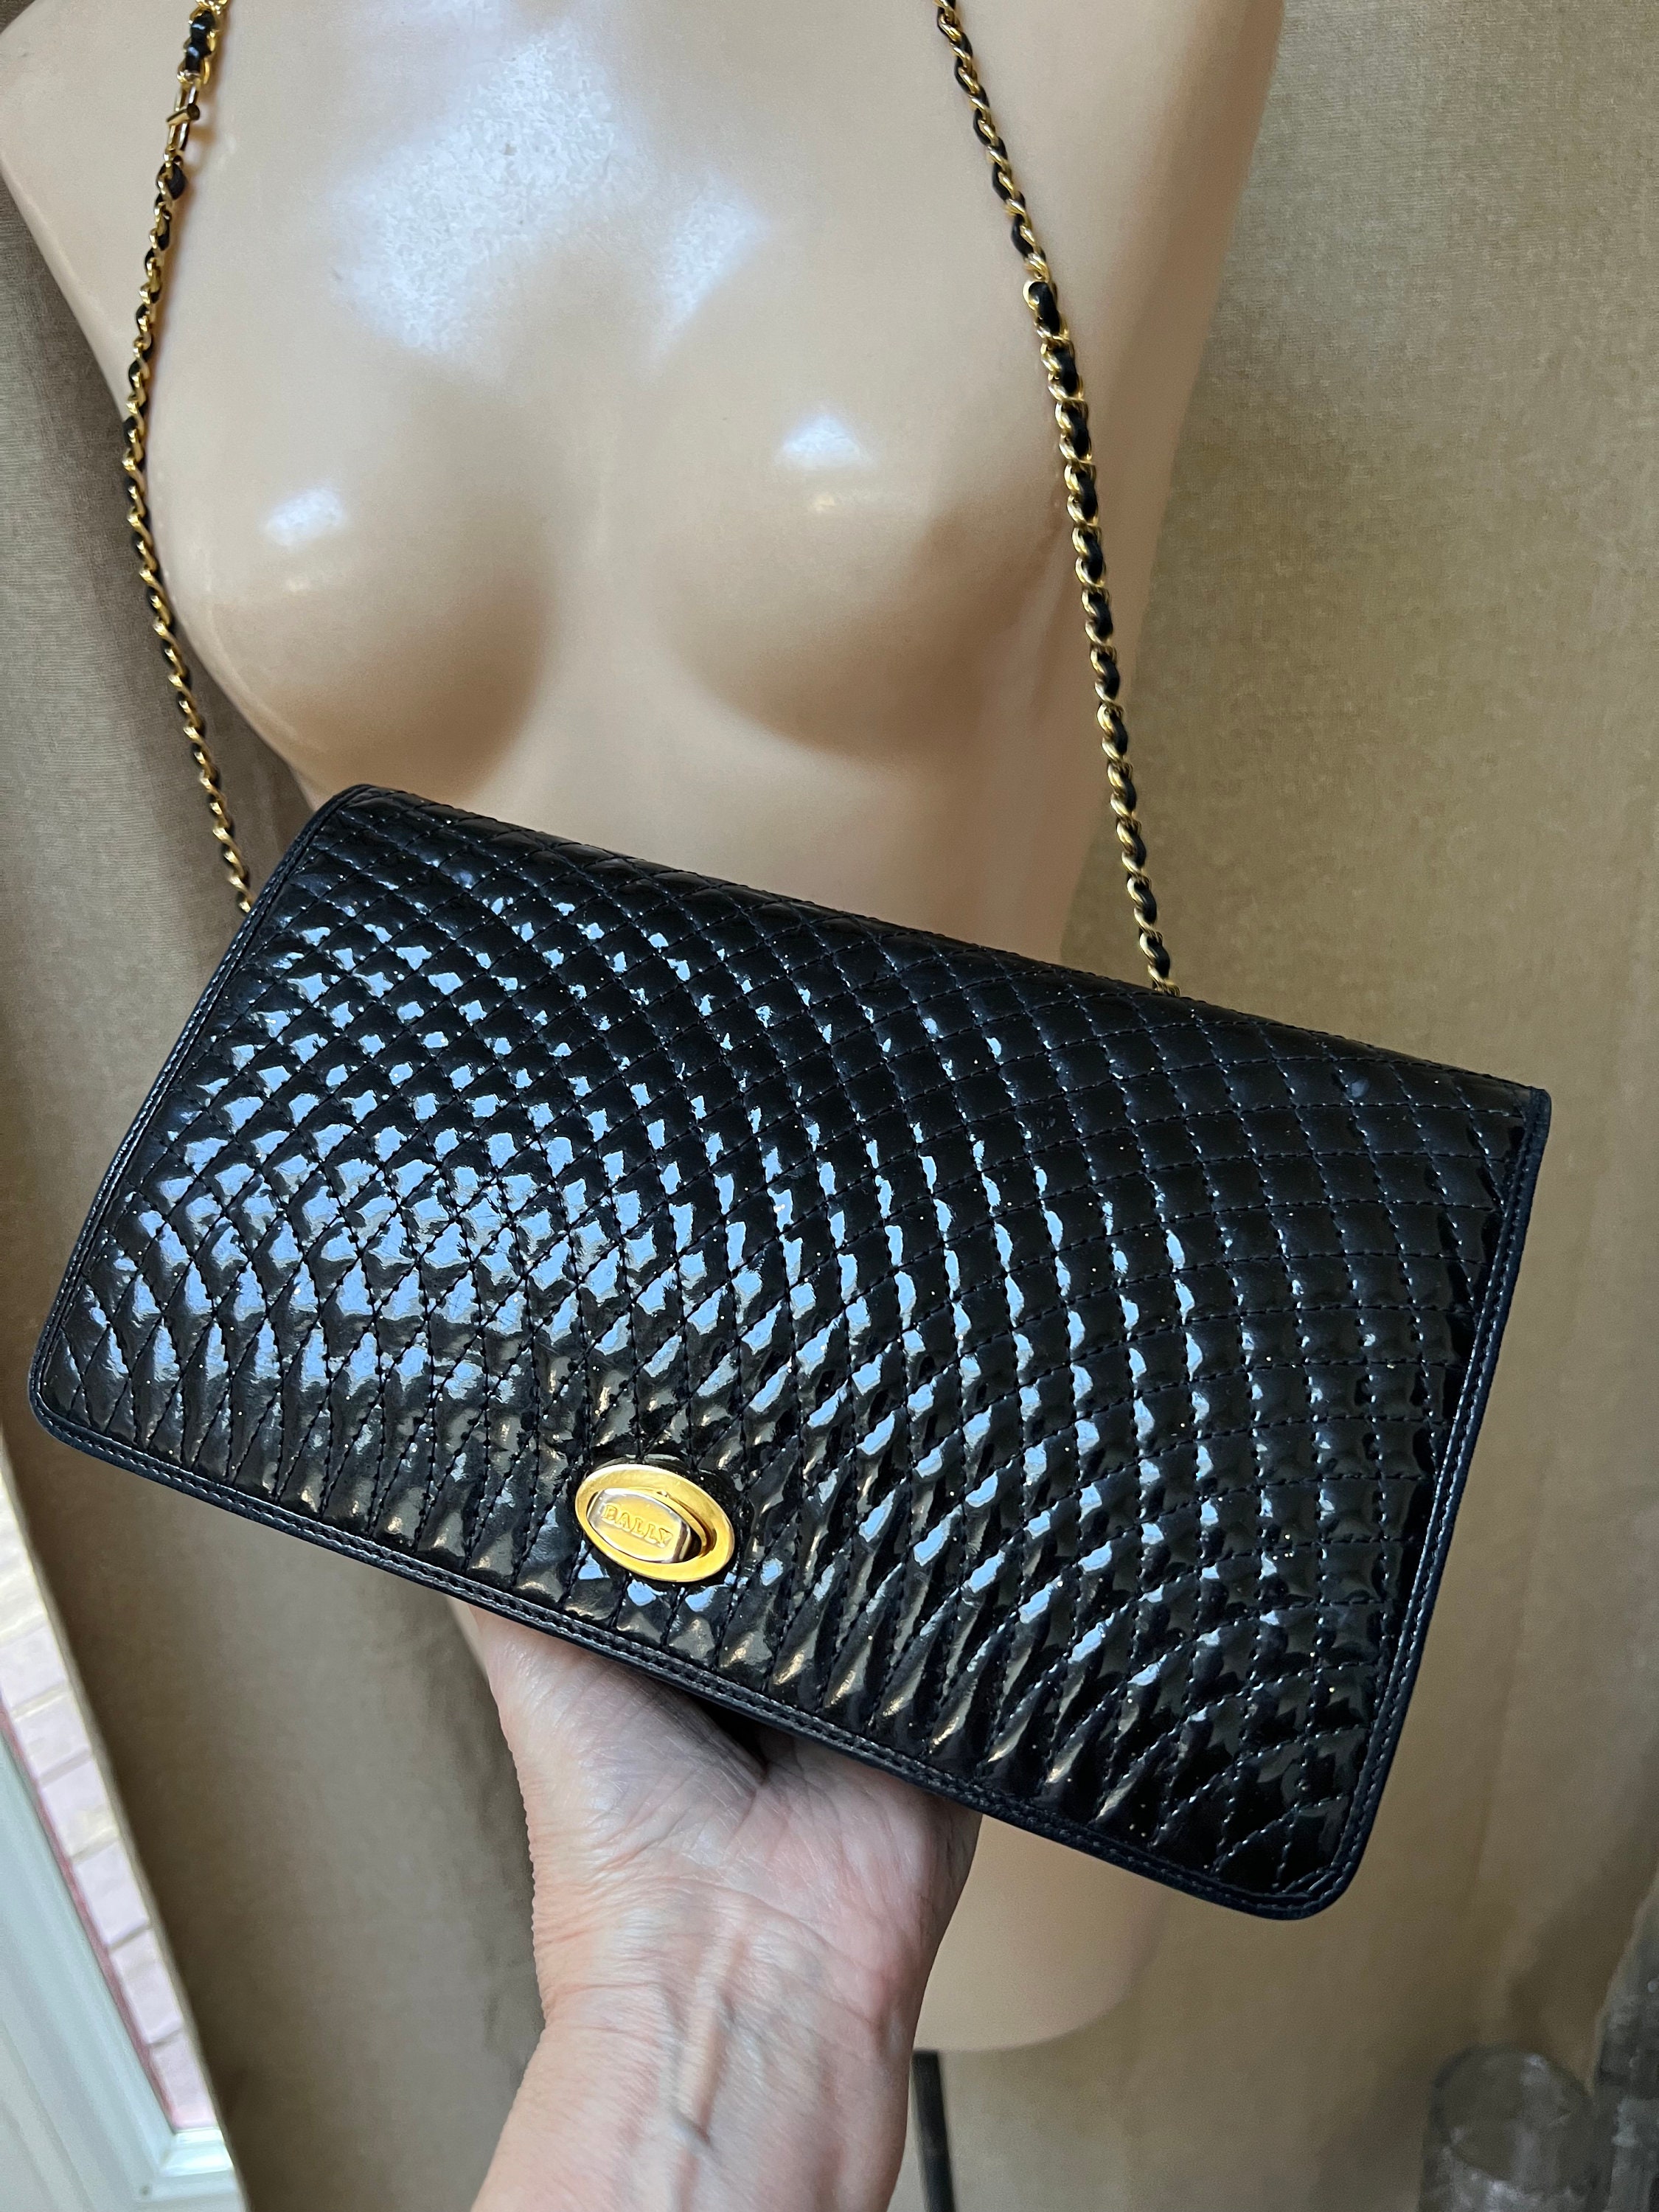 Jay Herbert, Bags, Vintage Jay Herbert Black Patent Leather Quilted  Chanel Style Handbag Classic